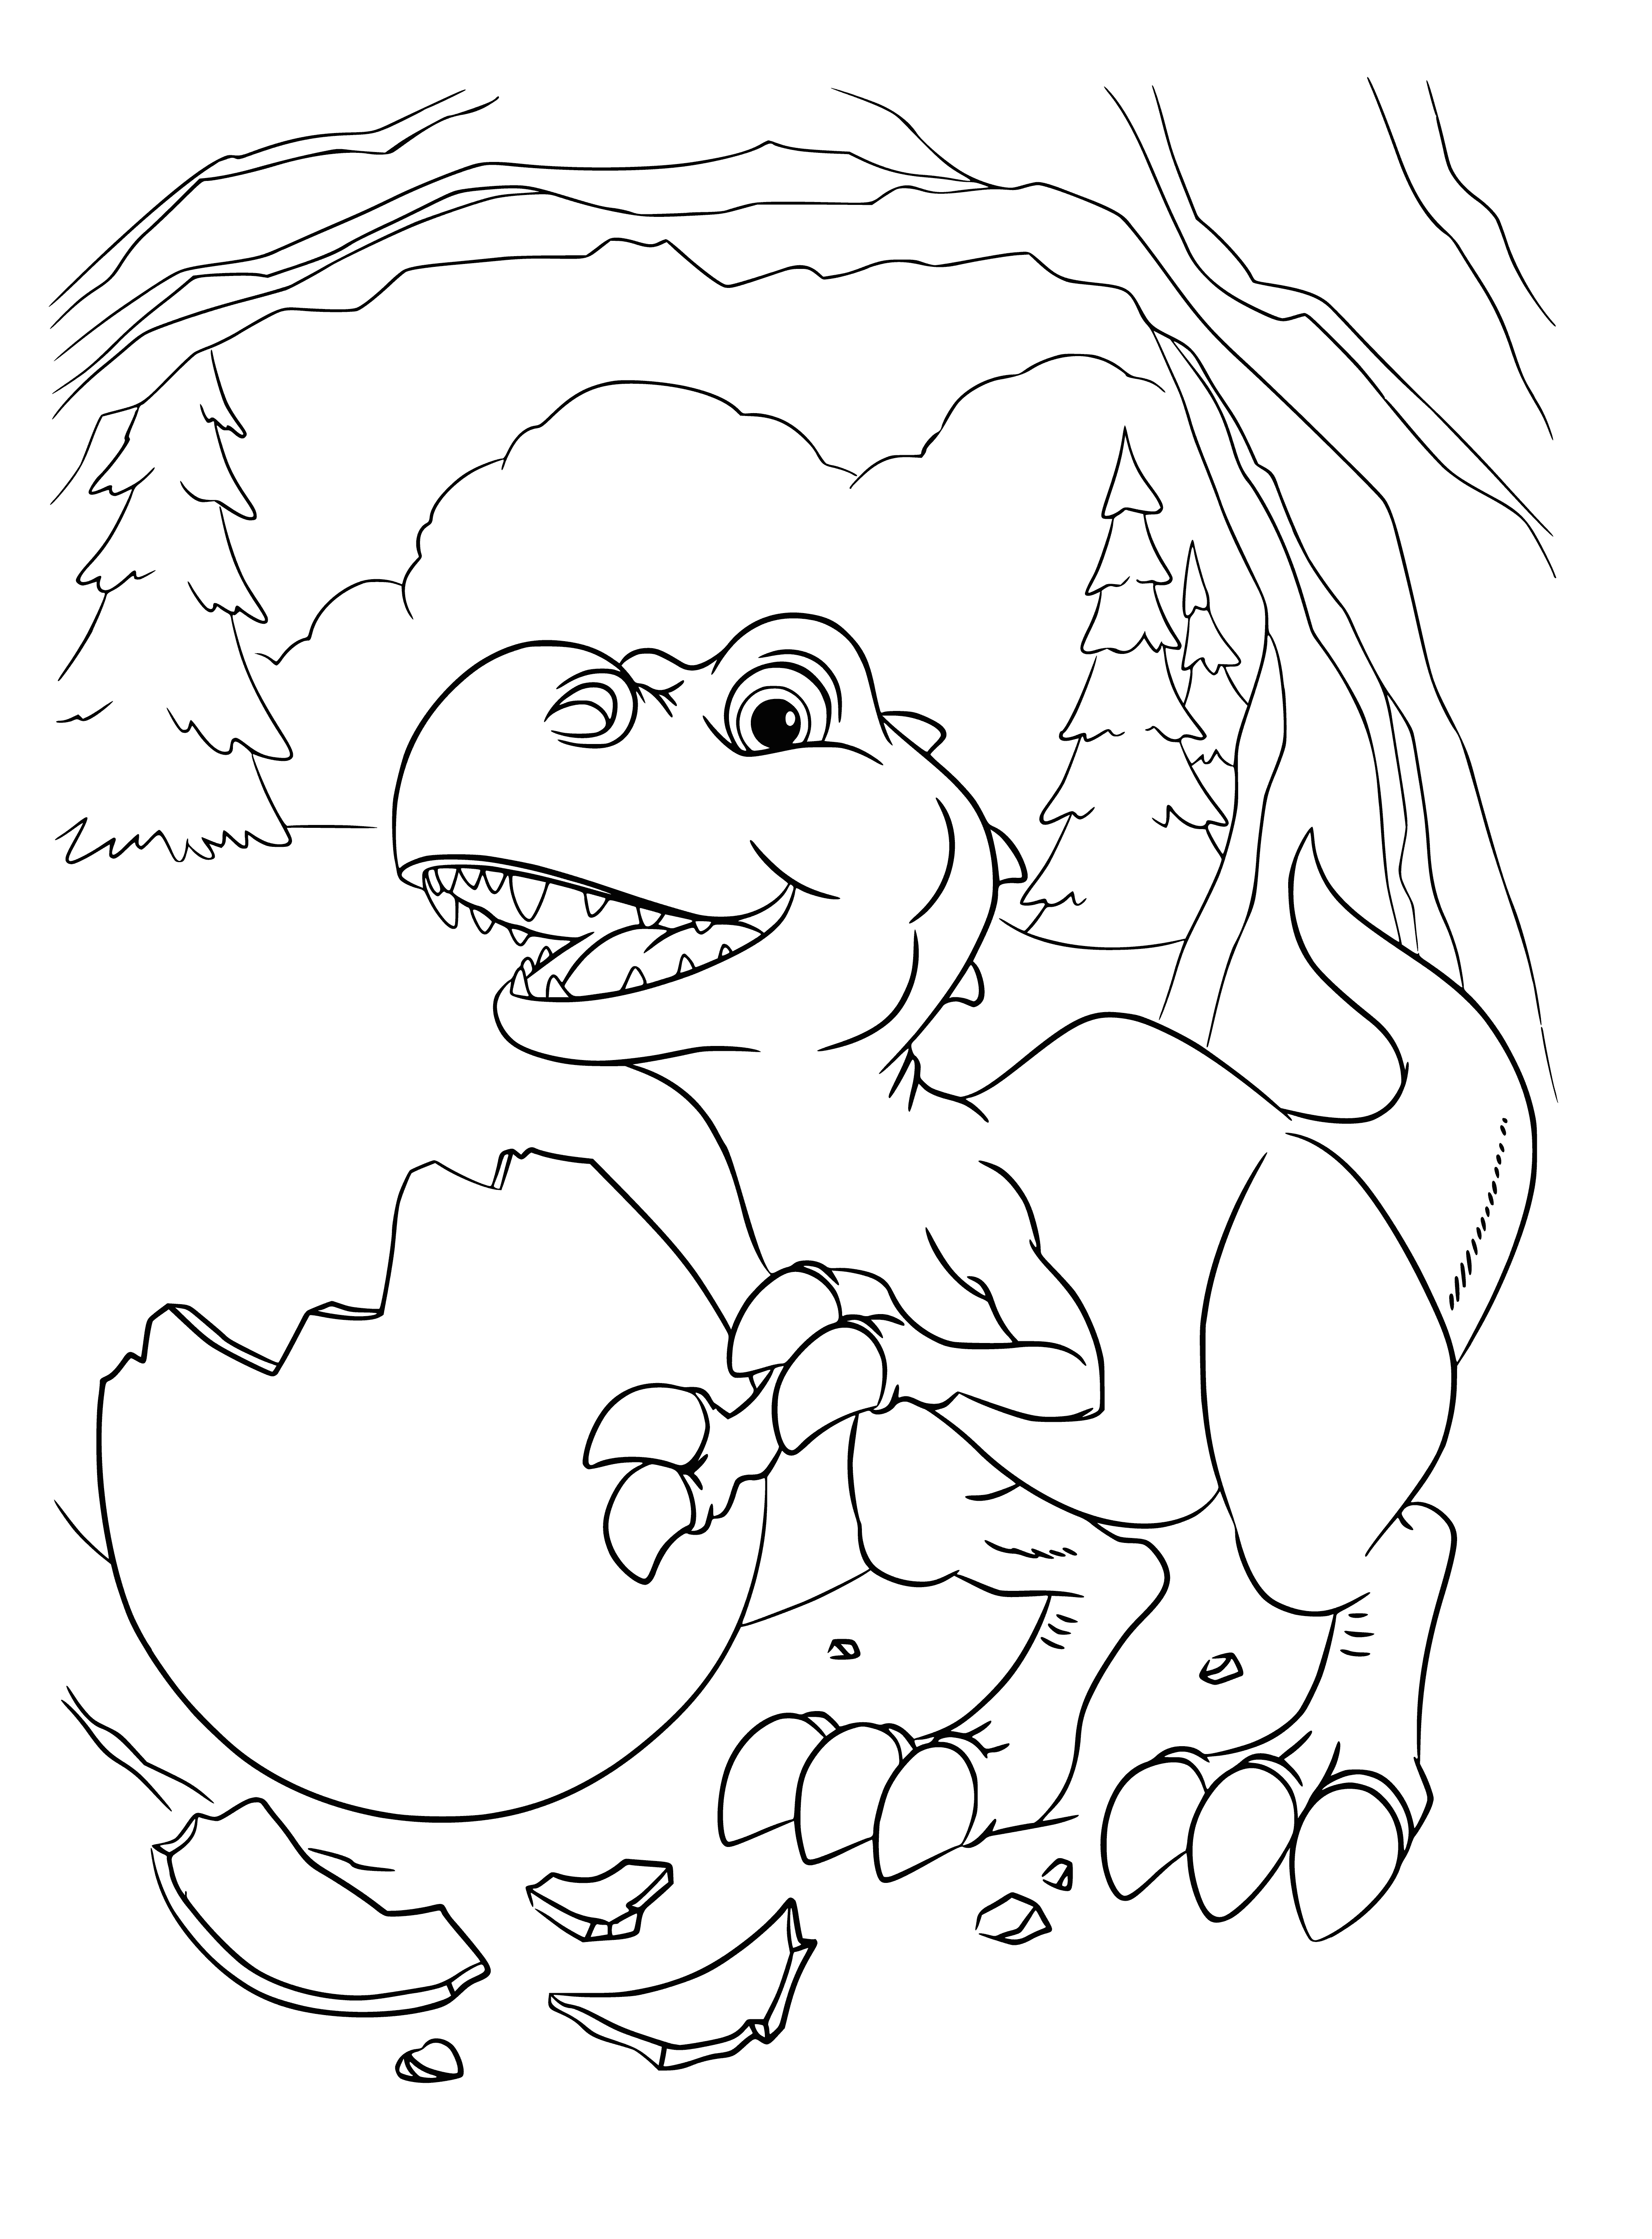 coloring page: Cute baby dino with light green scales, long tail, big blue eyes & sharp teeth. Looks happy & playful.